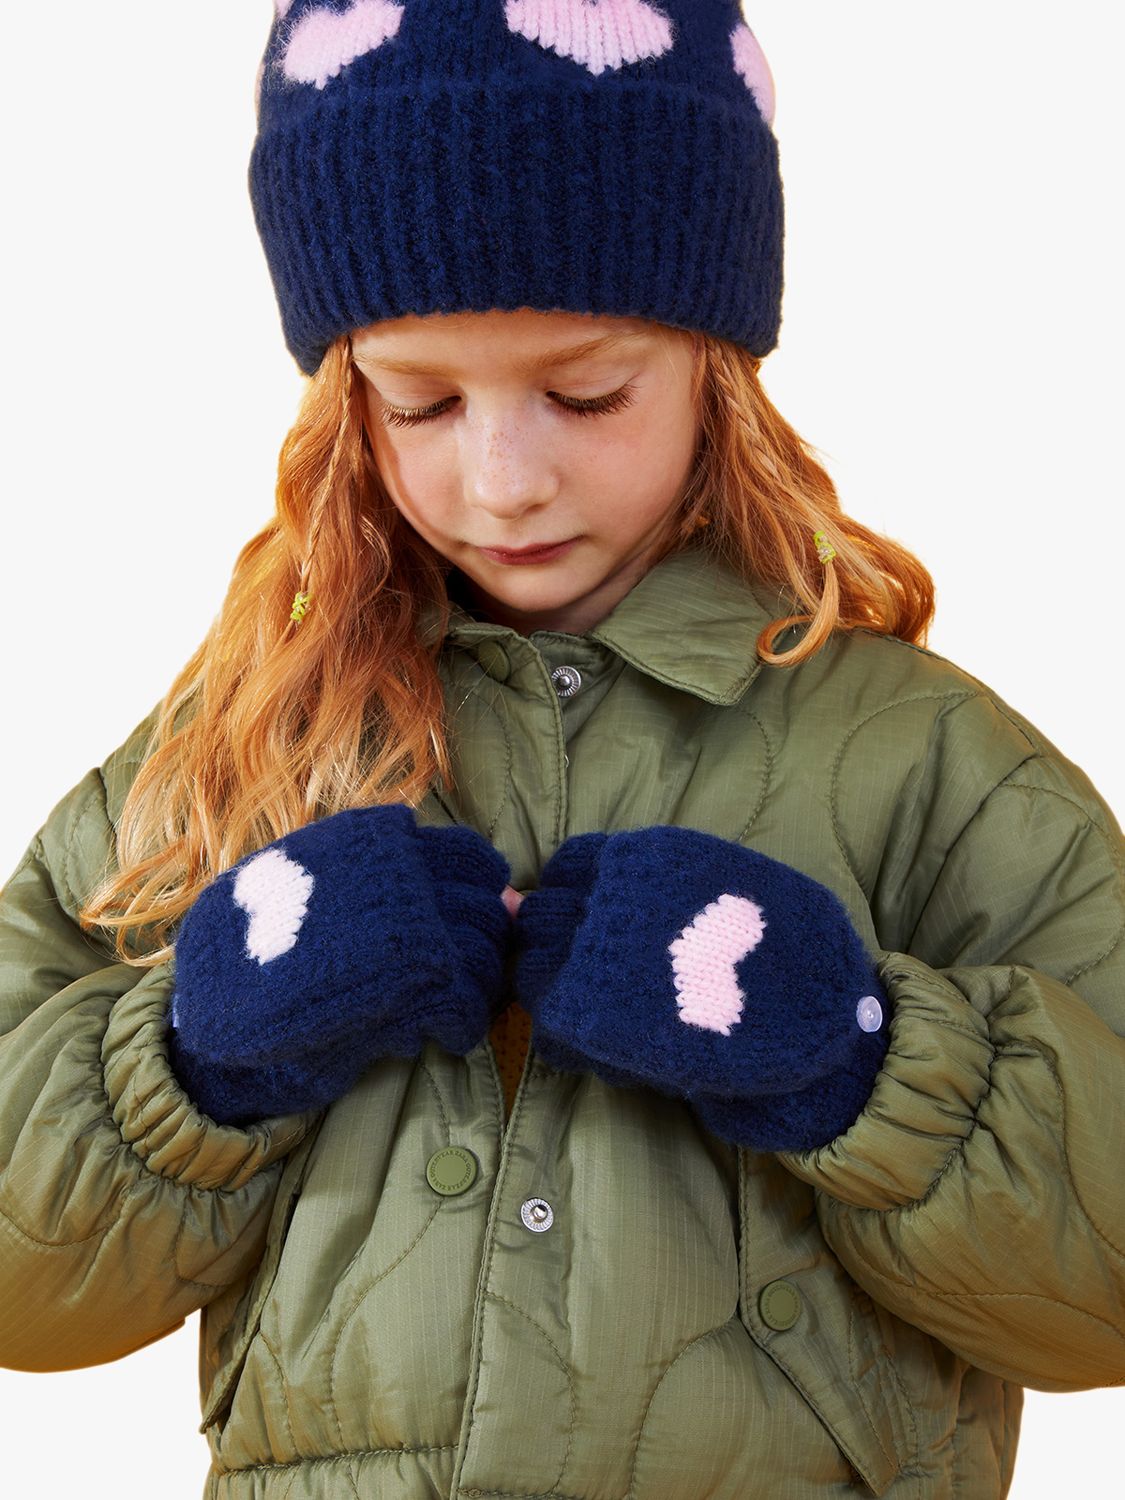 Buy Angels by Accessorize Kids' Heart Capped Gloves, Navy/Multi Online at johnlewis.com